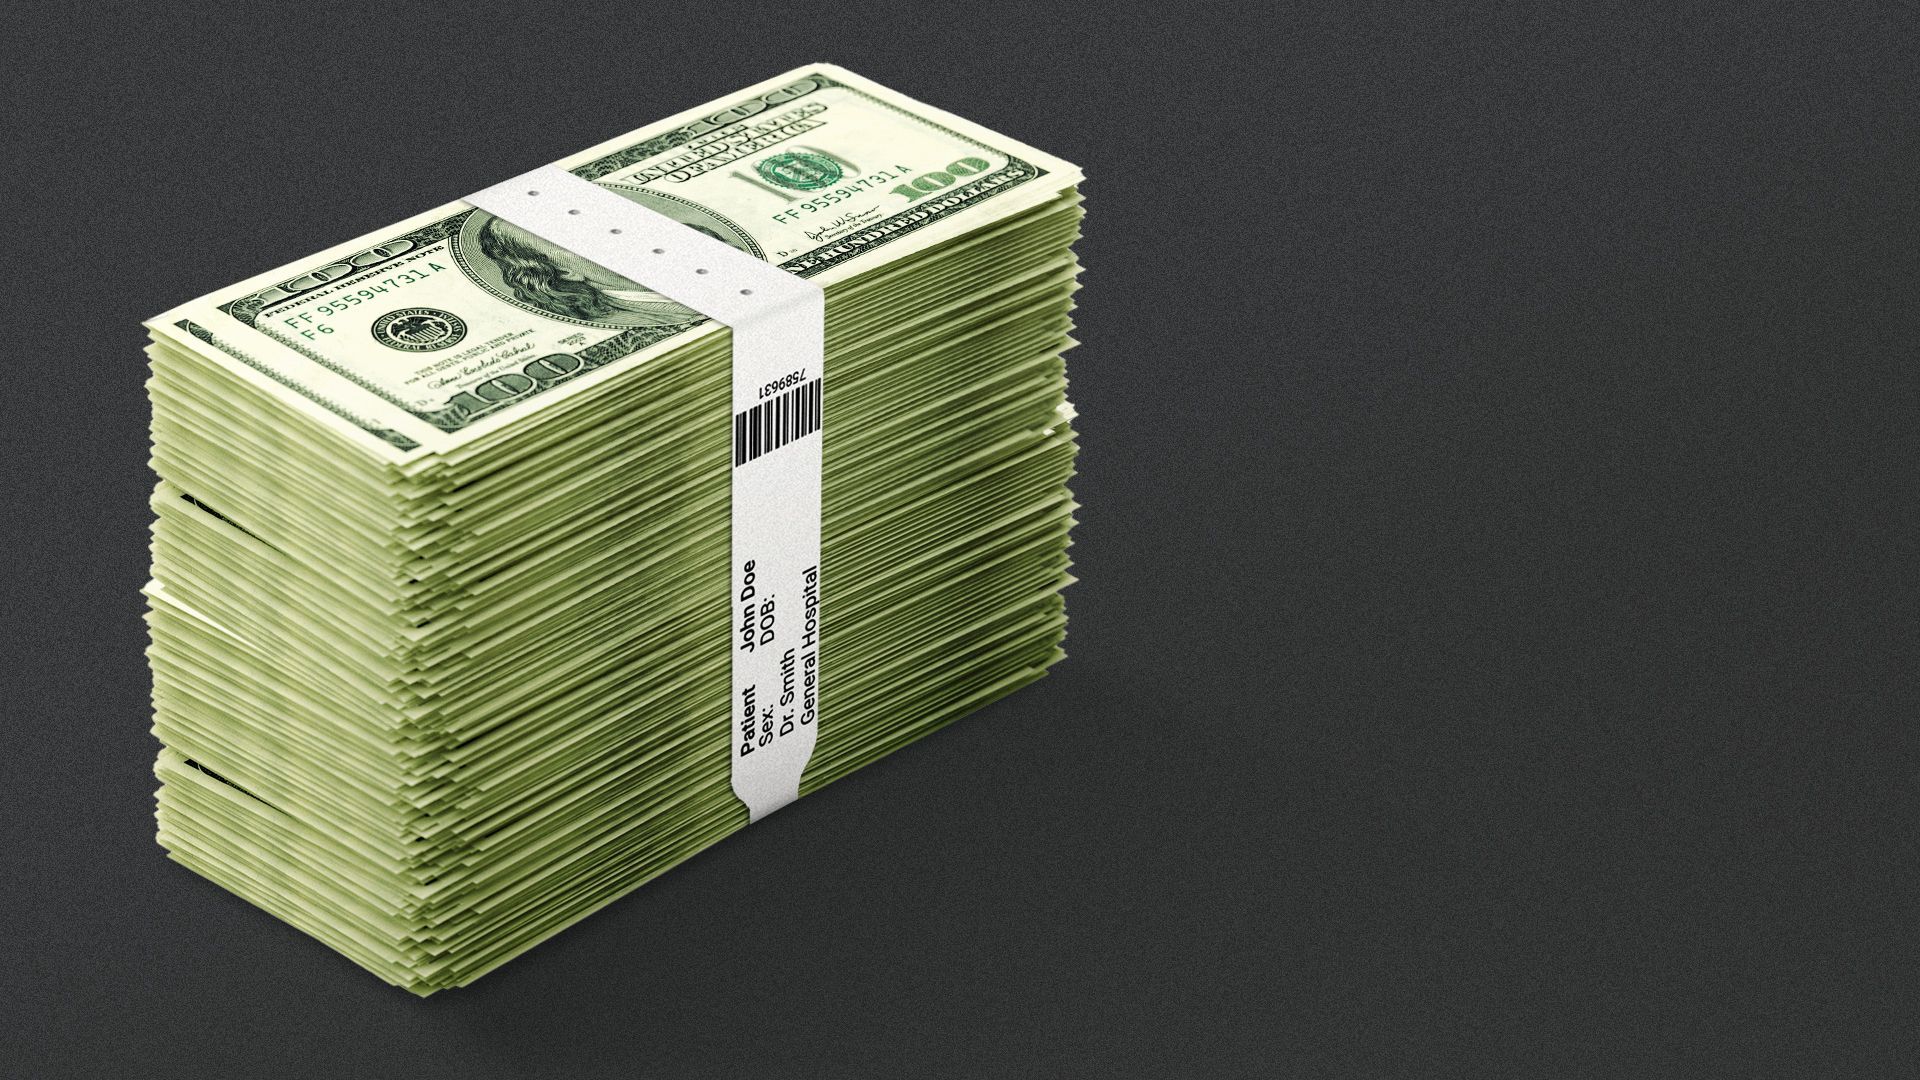 an illustration of a stack of money with a hospital bracelet wrapped around it like a badn